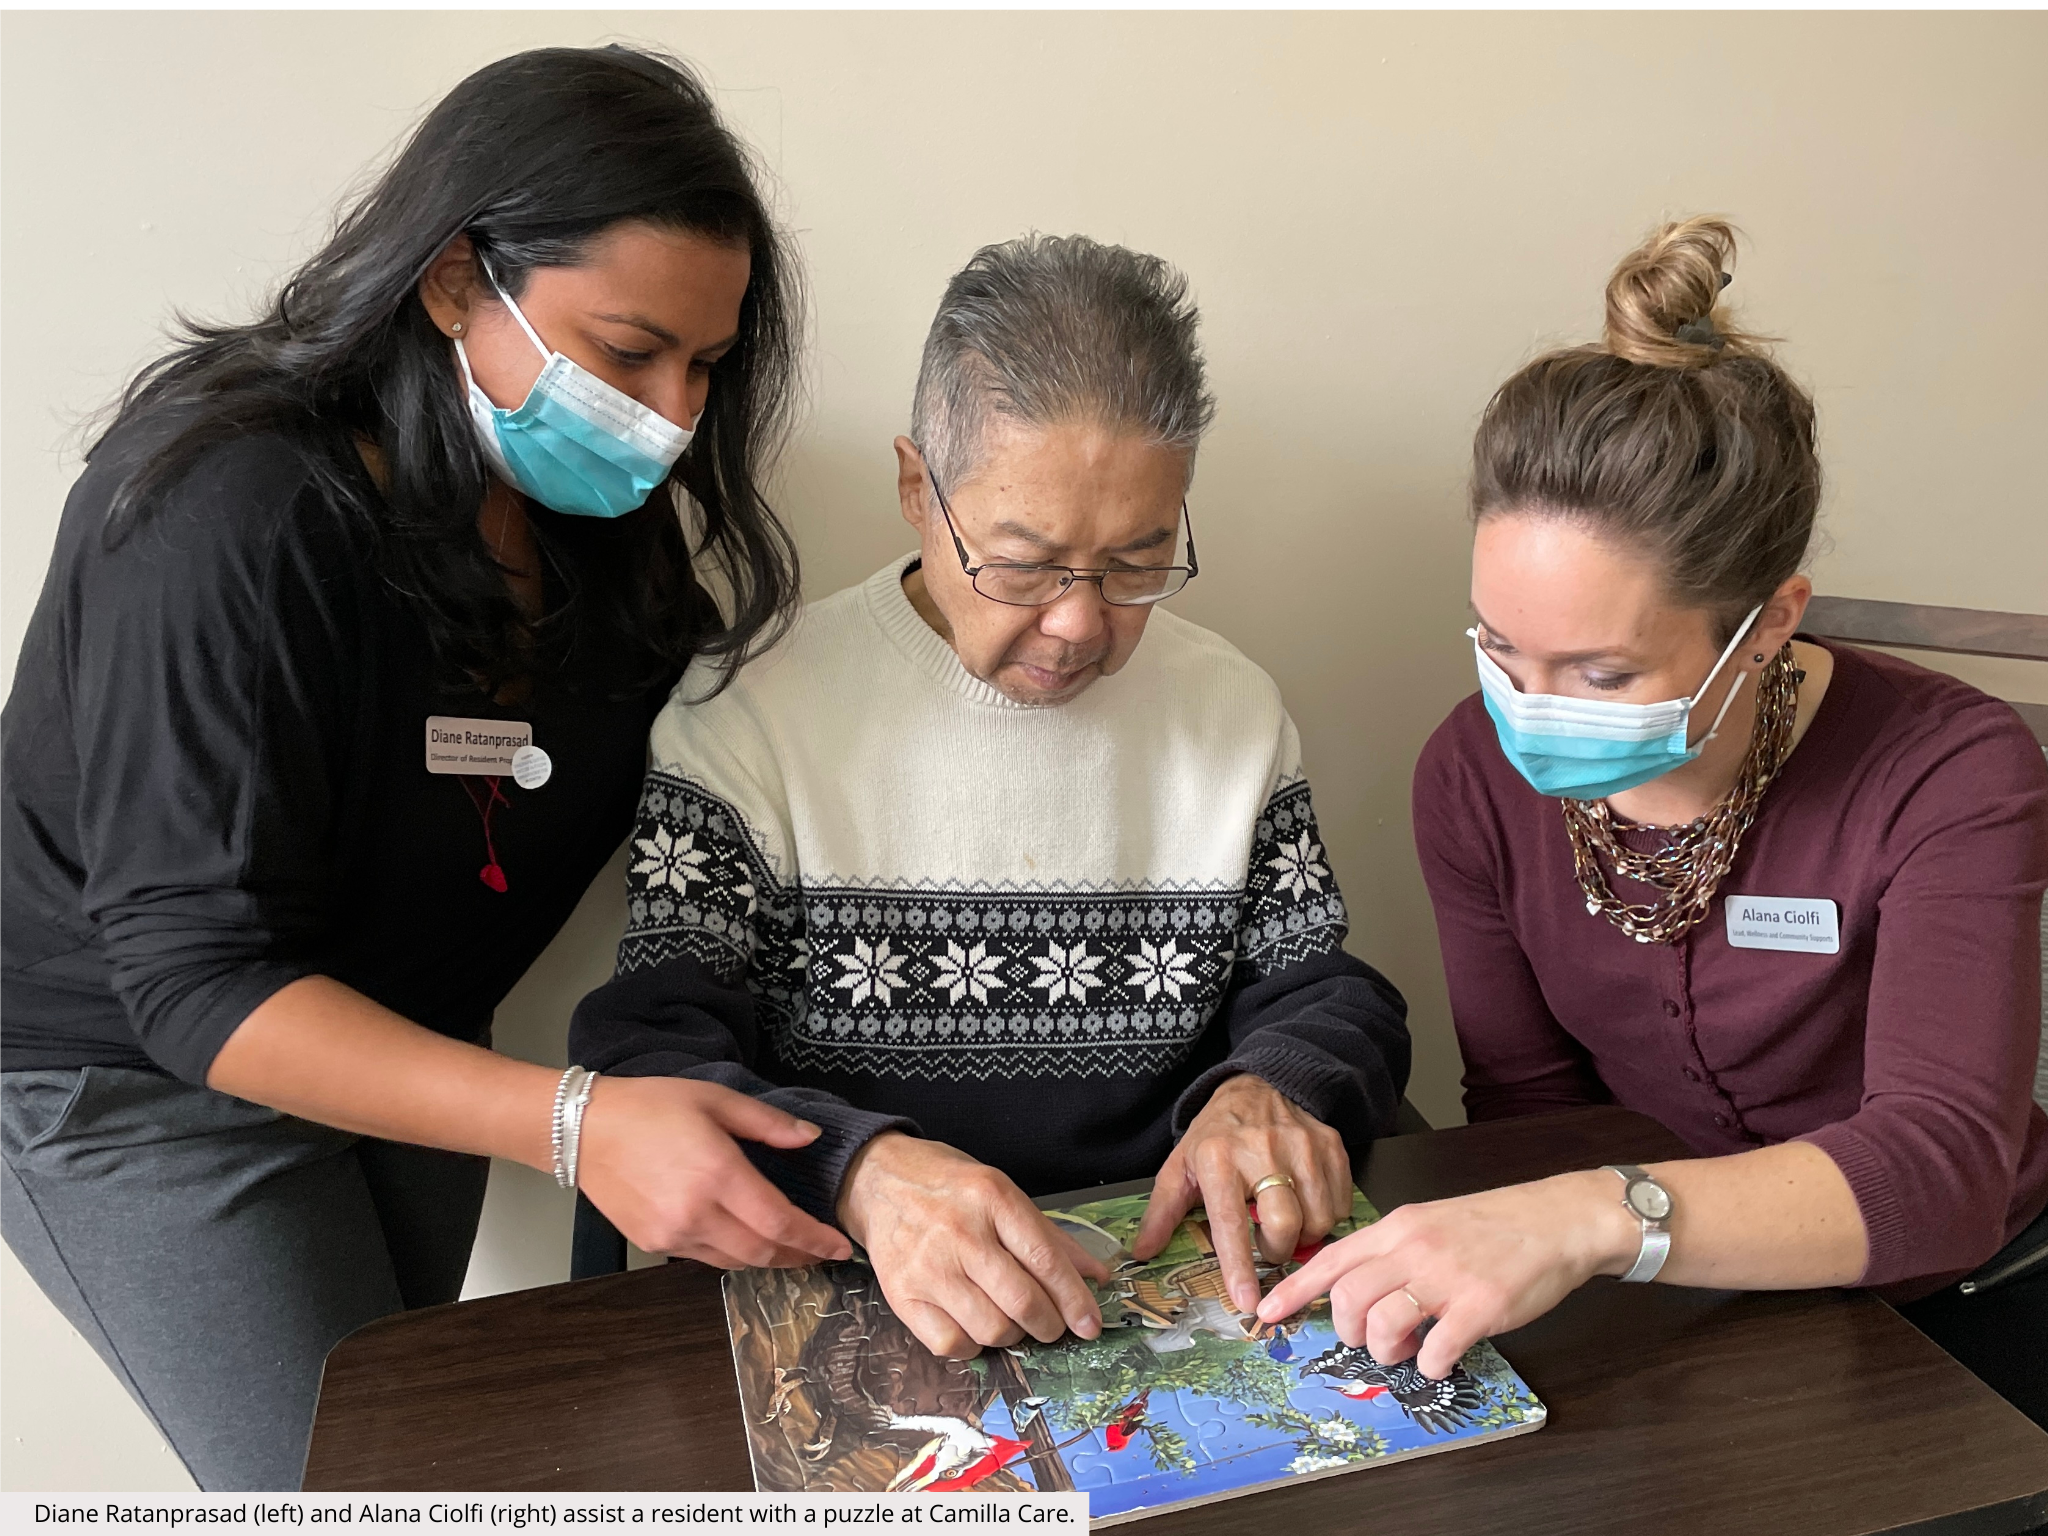 Diane Ratanprasad (left) and Alana Ciolfi (right) assist a resident with a puzzle at Camilla Care.